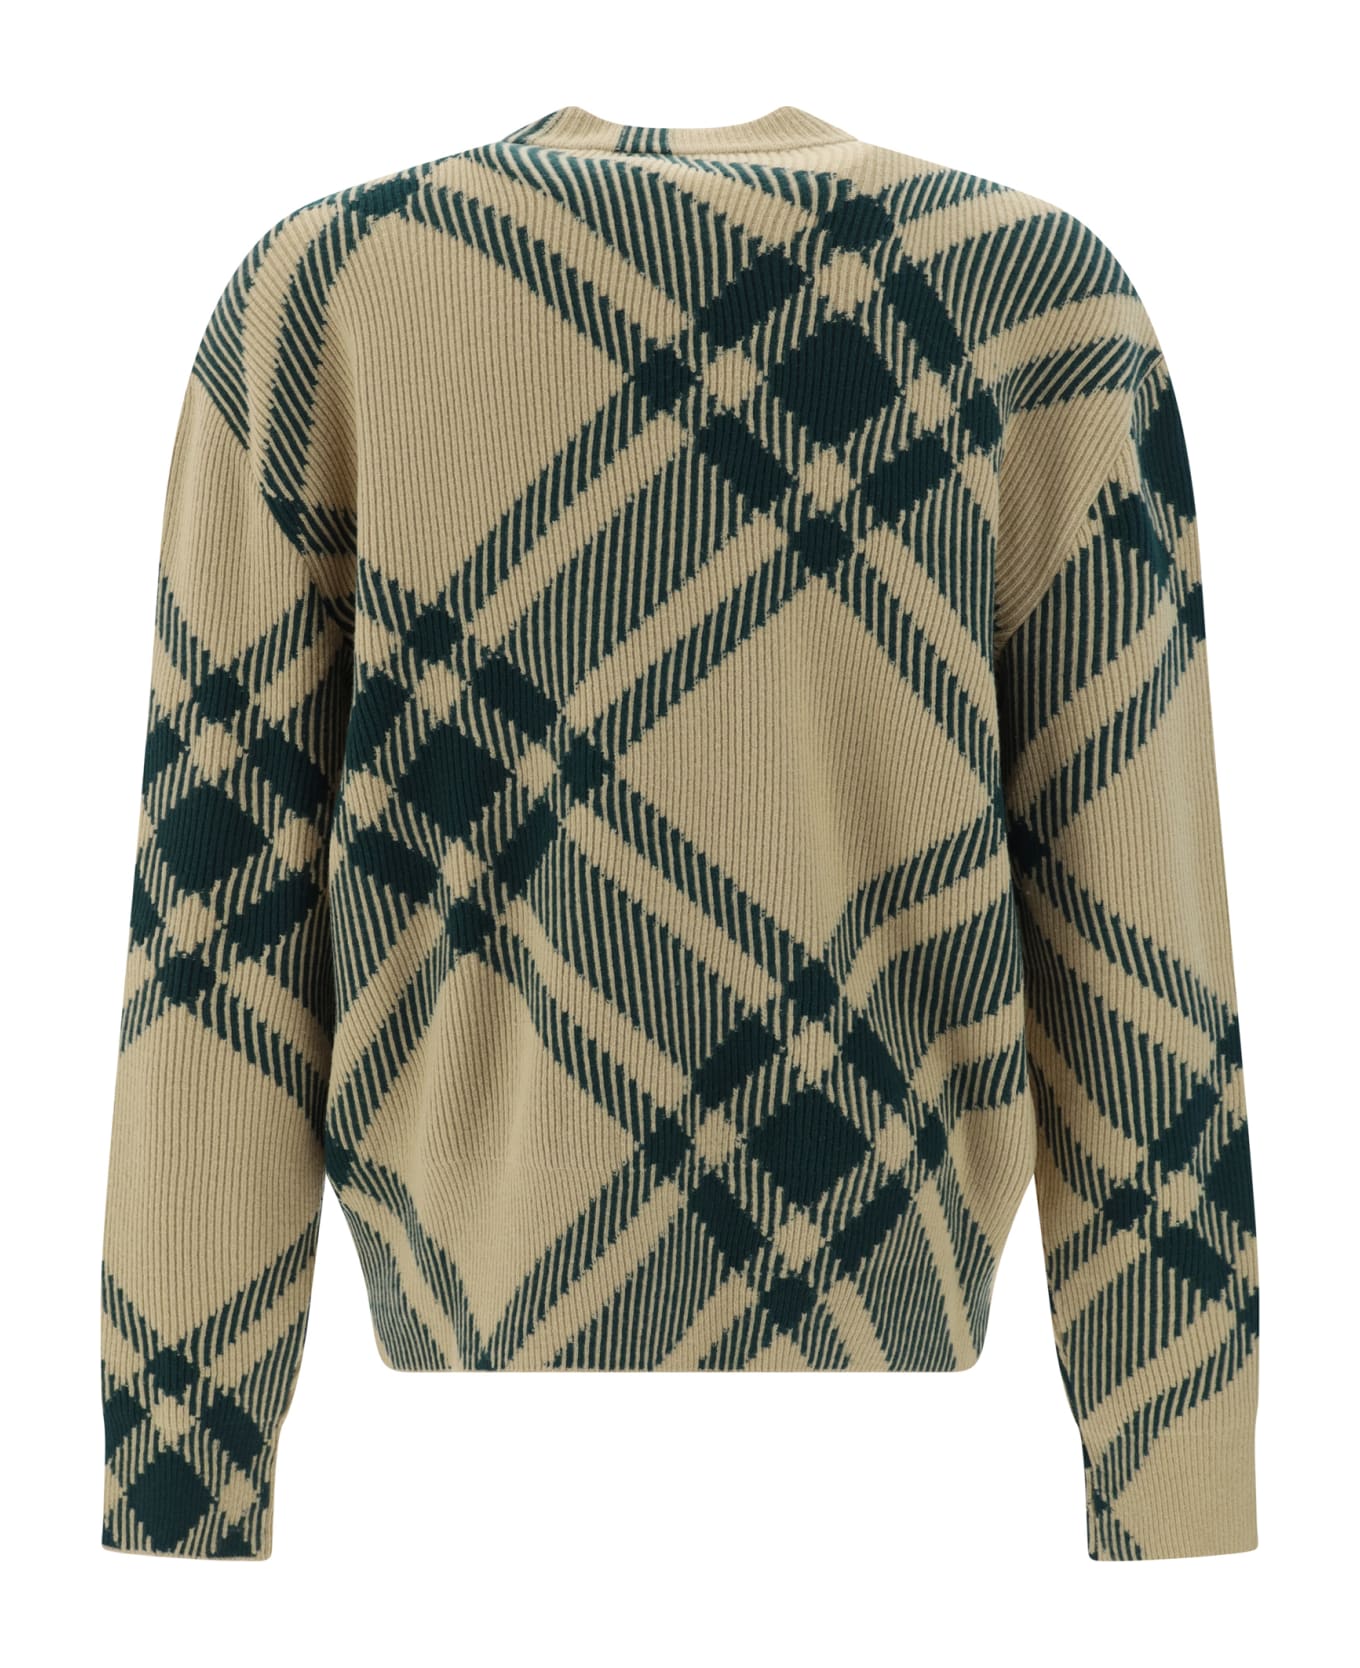 Burberry Cardigan - Burberry side logo-plaque detail 70mm boots